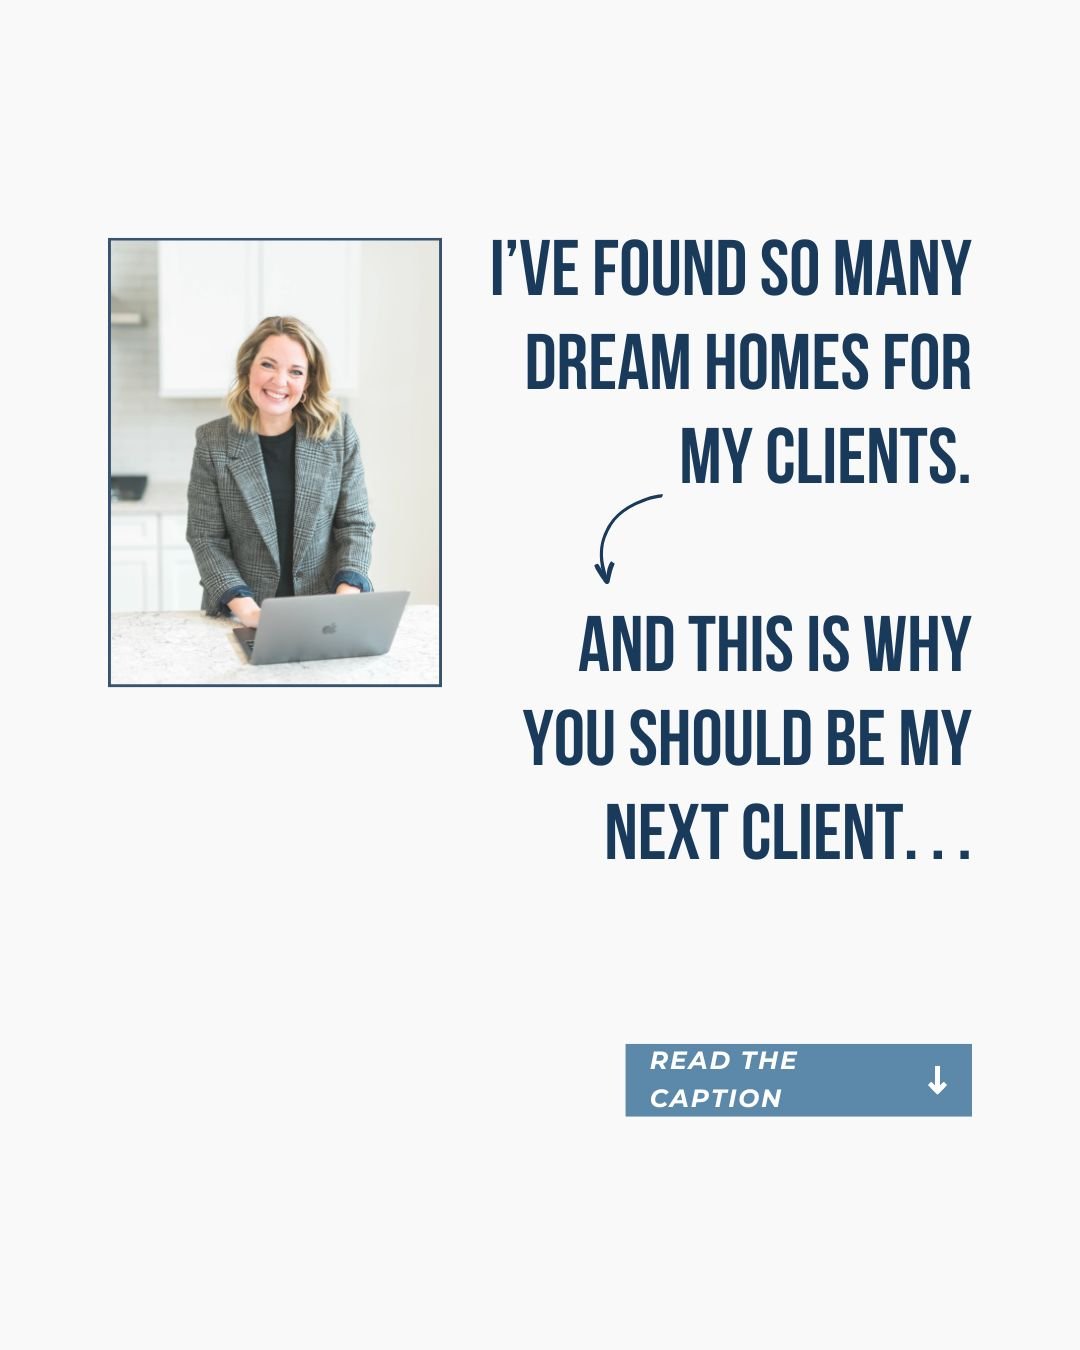 It all comes down to one thing: 

Market expertise! 

Having an agent who really understands the market will make your buying experience so much smoother and easier. 

With the right agent on your side, you&rsquo;ll be able to find the right homes an